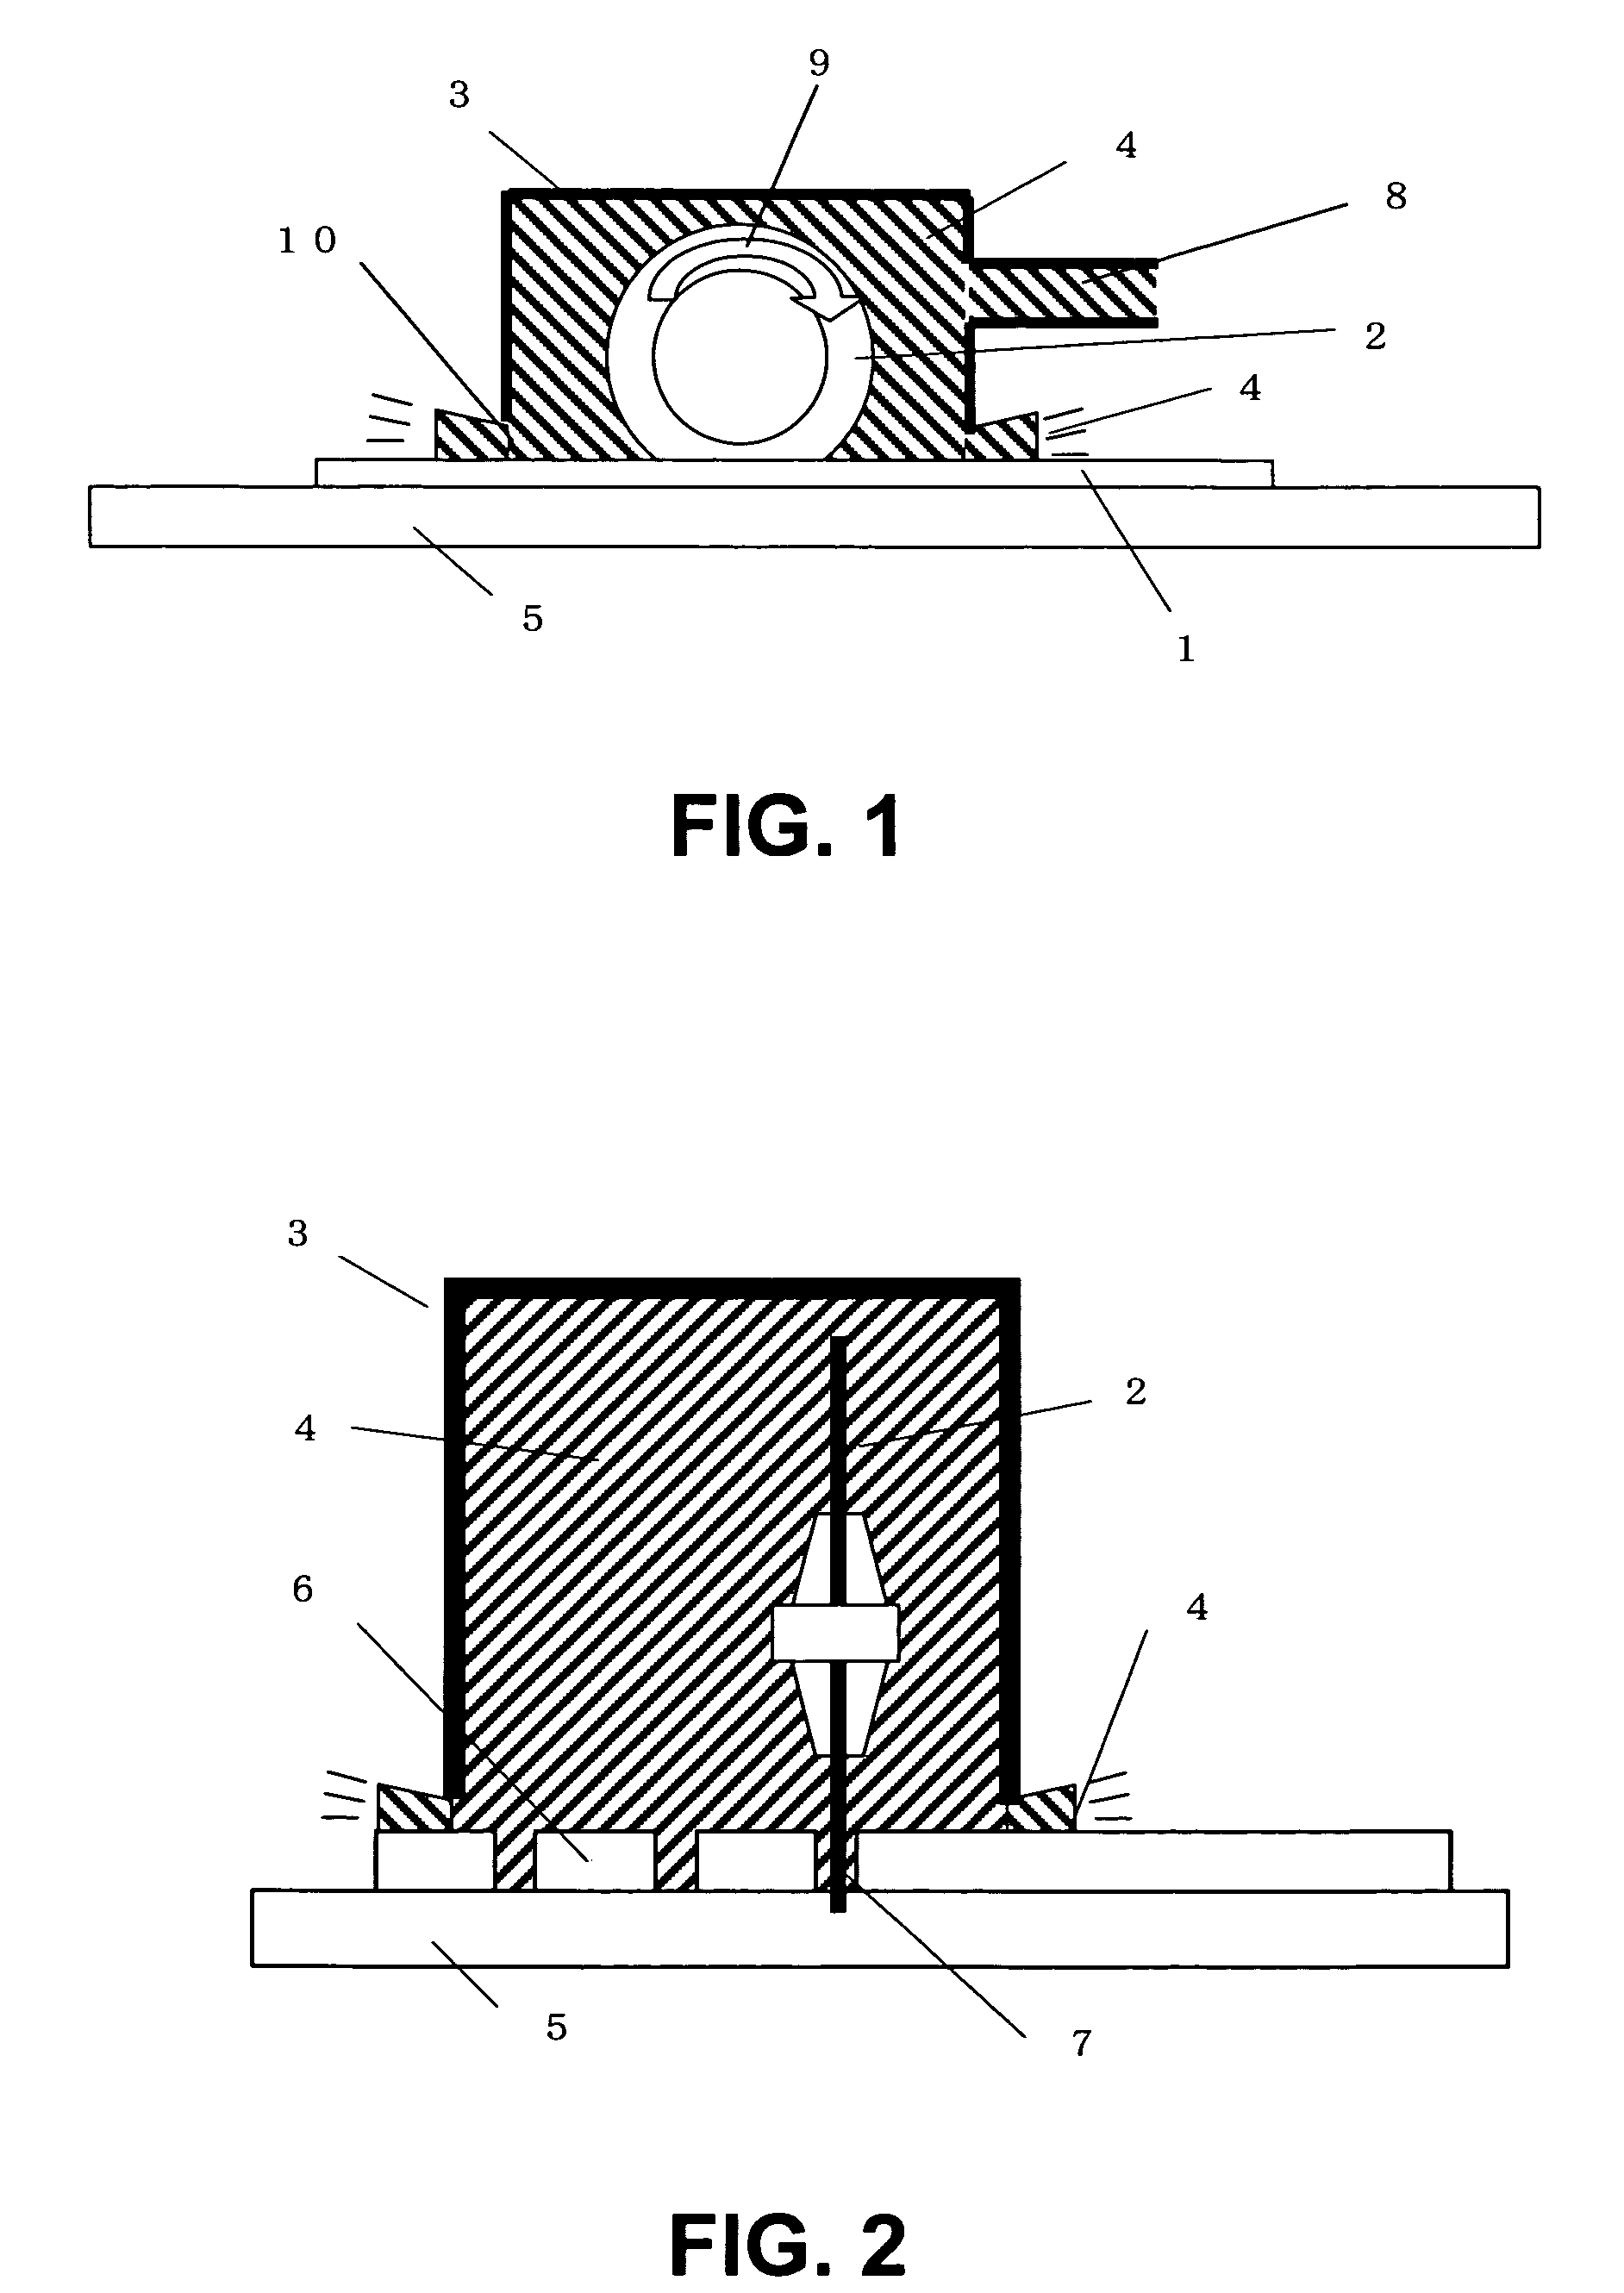 Dicing method using an encased dicing blade submerged in cooling water